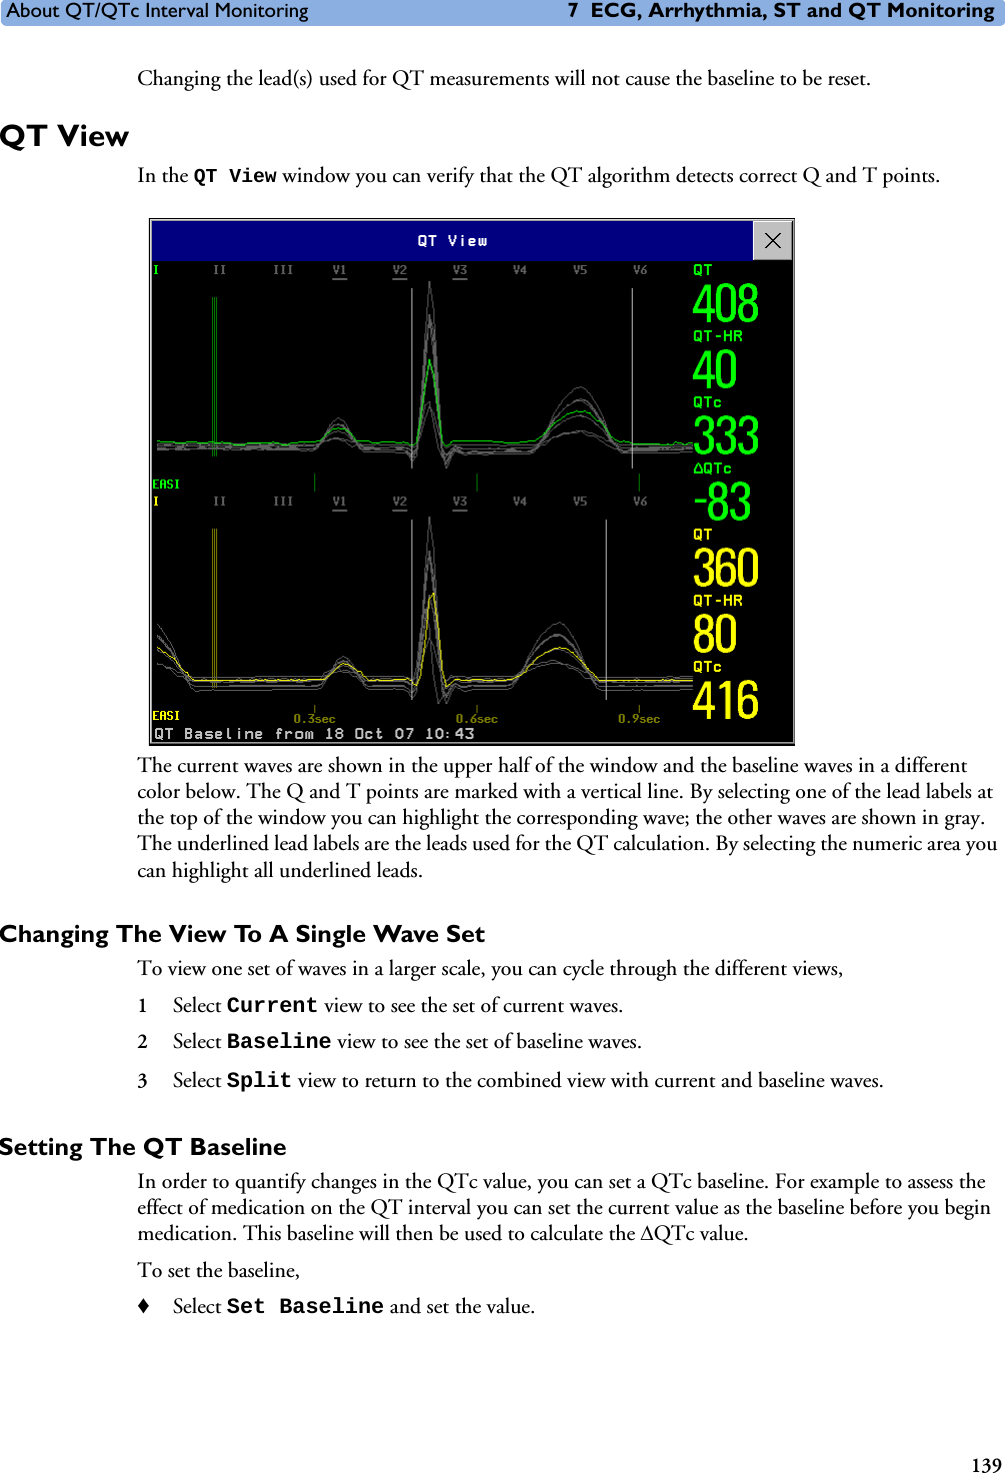 About QT/QTc Interval Monitoring 7 ECG, Arrhythmia, ST and QT Monitoring139Changing the lead(s) used for QT measurements will not cause the baseline to be reset. QT ViewIn the QT View window you can verify that the QT algorithm detects correct Q and T points. The current waves are shown in the upper half of the window and the baseline waves in a different color below. The Q and T points are marked with a vertical line. By selecting one of the lead labels at the top of the window you can highlight the corresponding wave; the other waves are shown in gray. The underlined lead labels are the leads used for the QT calculation. By selecting the numeric area you can highlight all underlined leads. Changing The View To A Single Wave SetTo view one set of waves in a larger scale, you can cycle through the different views, 1Select Current view to see the set of current waves.2Select Baseline view to see the set of baseline waves. 3Select Split view to return to the combined view with current and baseline waves. Setting The QT BaselineIn order to quantify changes in the QTc value, you can set a QTc baseline. For example to assess the effect of medication on the QT interval you can set the current value as the baseline before you begin medication. This baseline will then be used to calculate the QTc value. To set the baseline, ♦Select Set Baseline and set the value. 